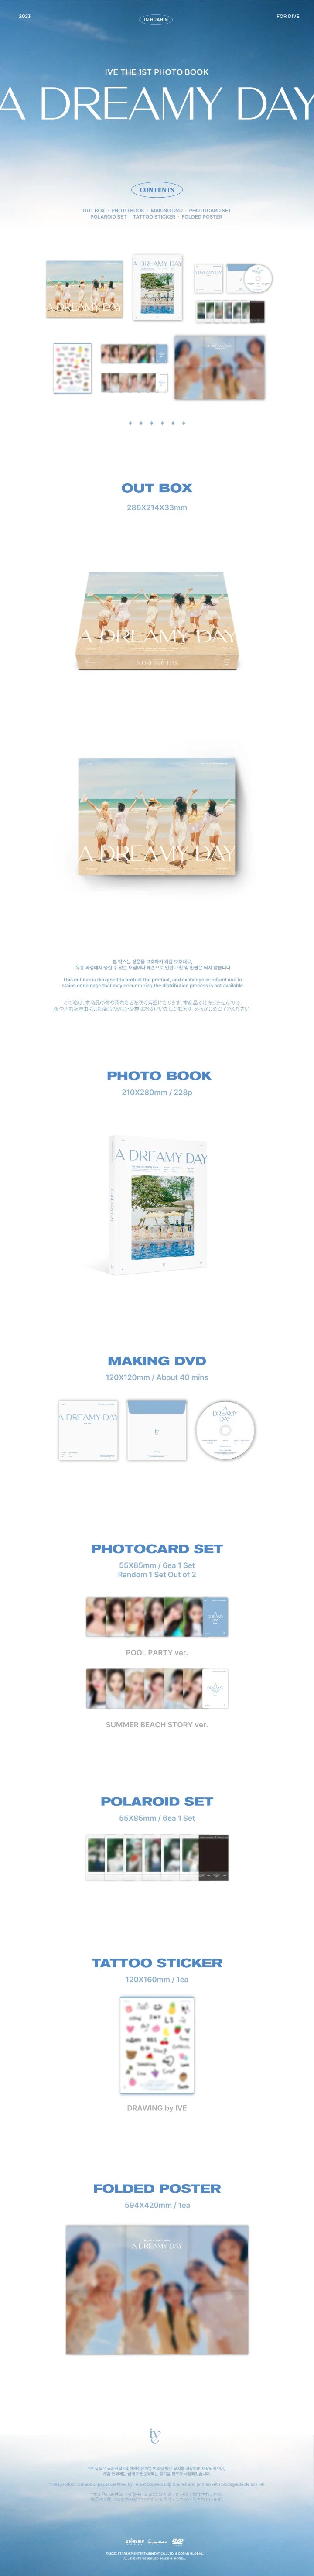 IVE - THE 1ST PHOTOBOOK   A DREAMY DAY Infographic